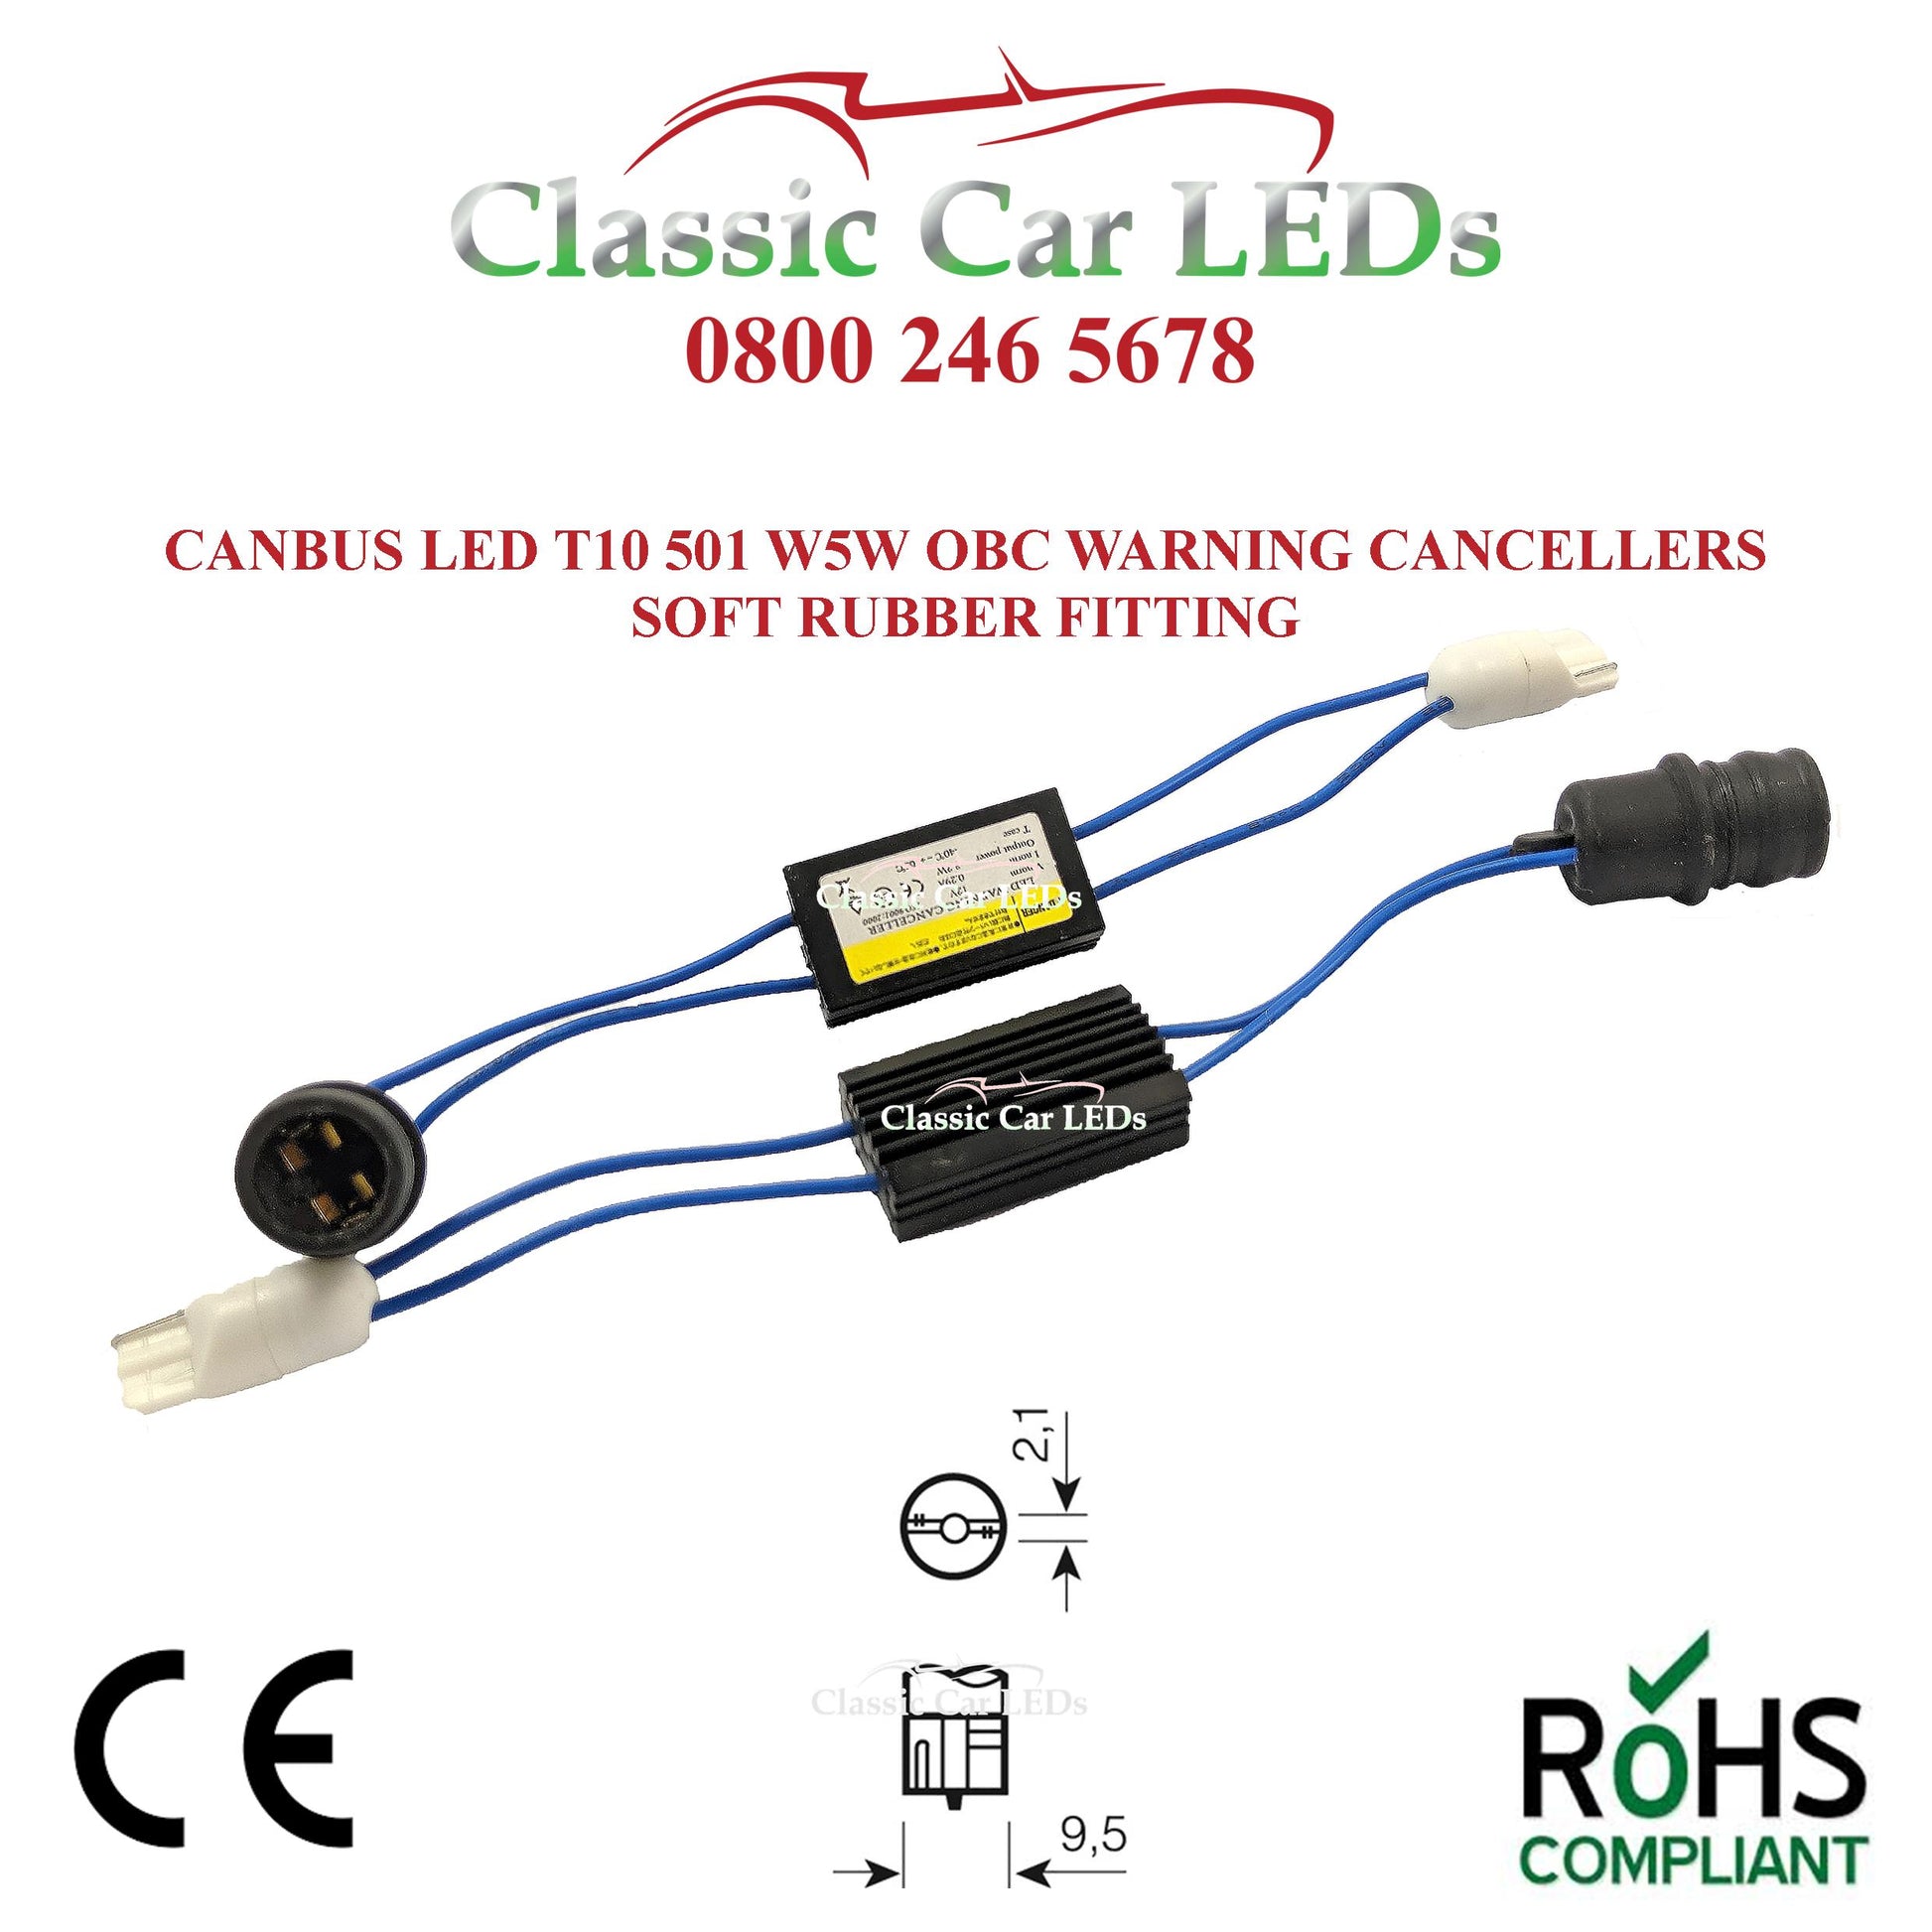 CANBUS LED T10 501 W5W OBC WARNING CANCELLERS SOFT RUBBER FITTING – Classic  Car LEDs Ltd